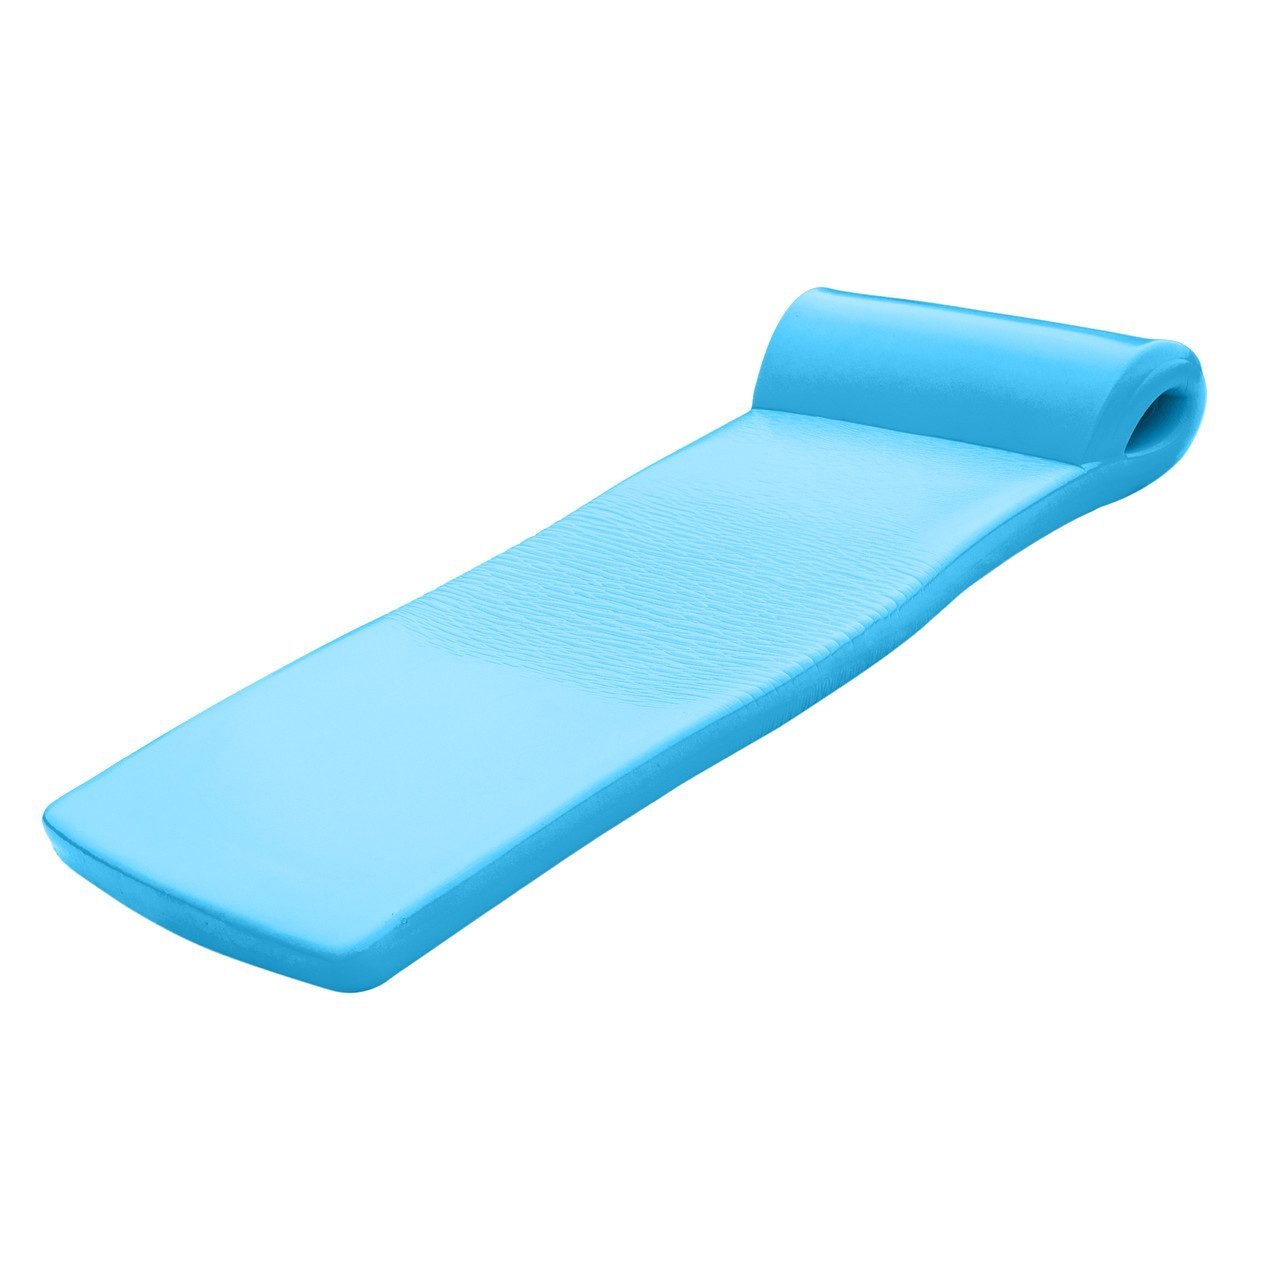 Ultra Sunsation Pool Float, Marina Blue, Vinyl Coating, 2.5 in. Thick (8021528)